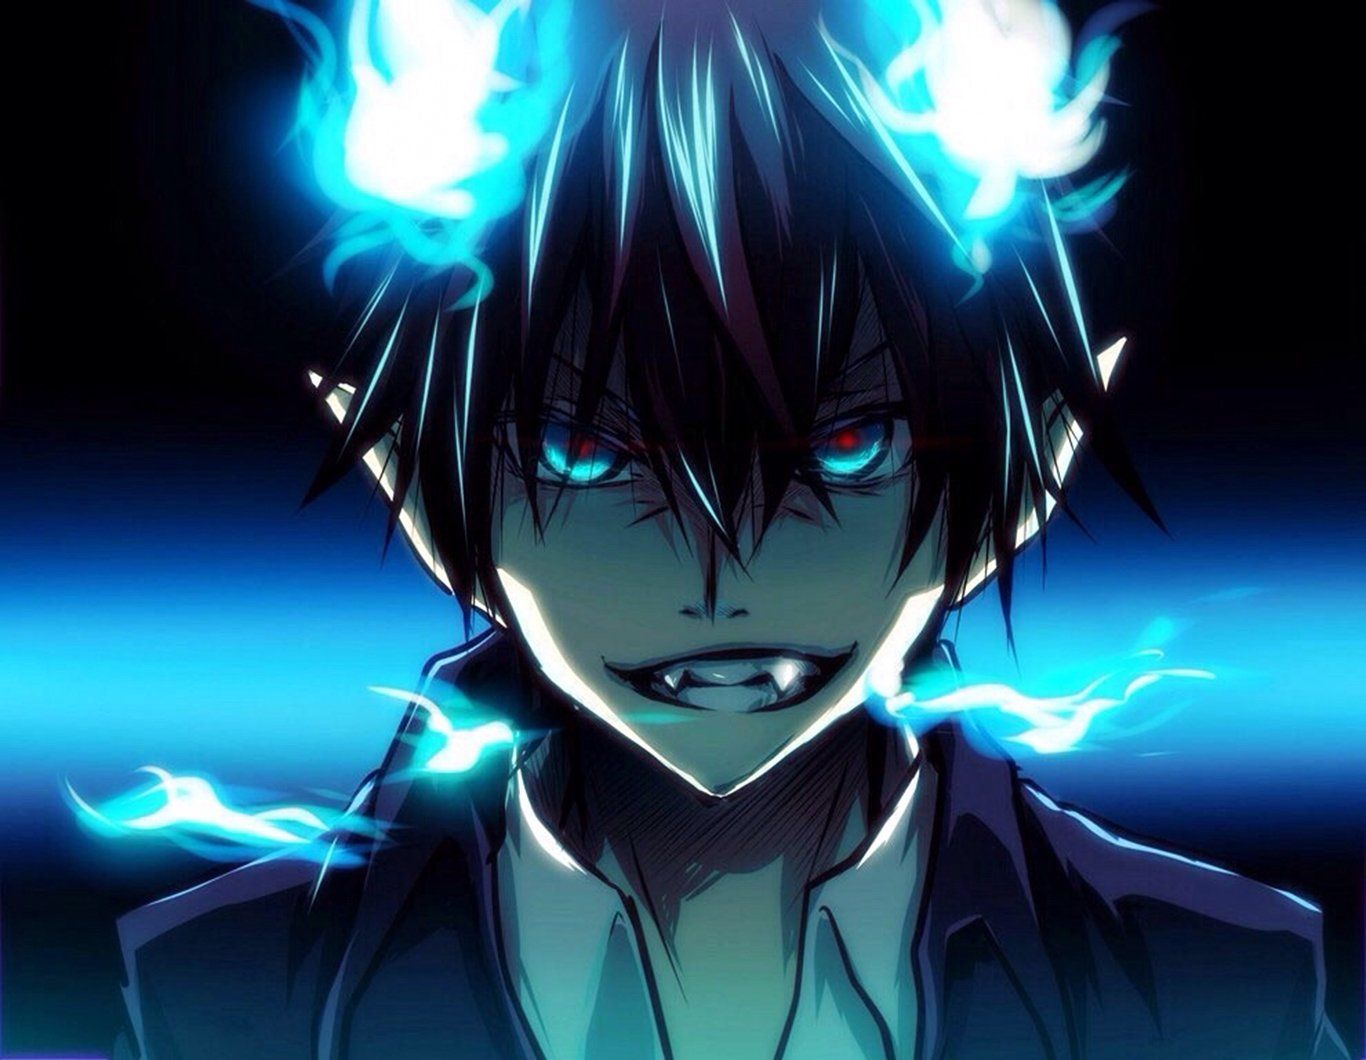 Anime Return of the Okumura Brothers  Character and Story Review of Blue  Exorcist  Kyoto Saga Anime  Japanese kawaii idol music culture news   Tokyo Girls Update